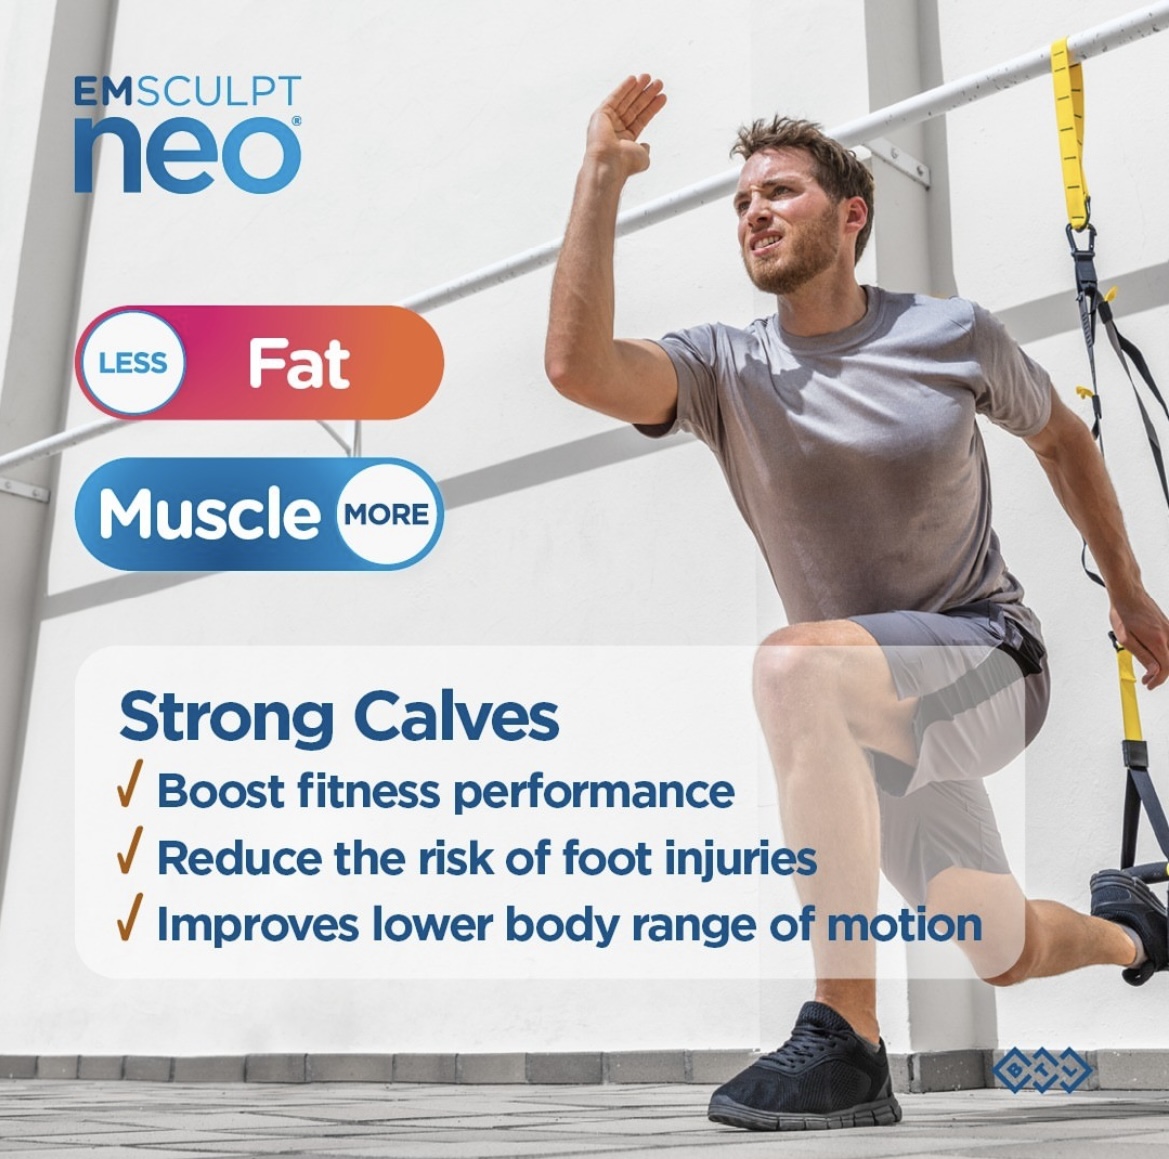 #EmsculptNeo not only helps with #bodycontouring, it helps strengthen #muscles outside of #workouts to help prevent injury. #RF #HIFEM #BTL #coretofloor #drannetrussell #seibellamedspa 501-228-6237